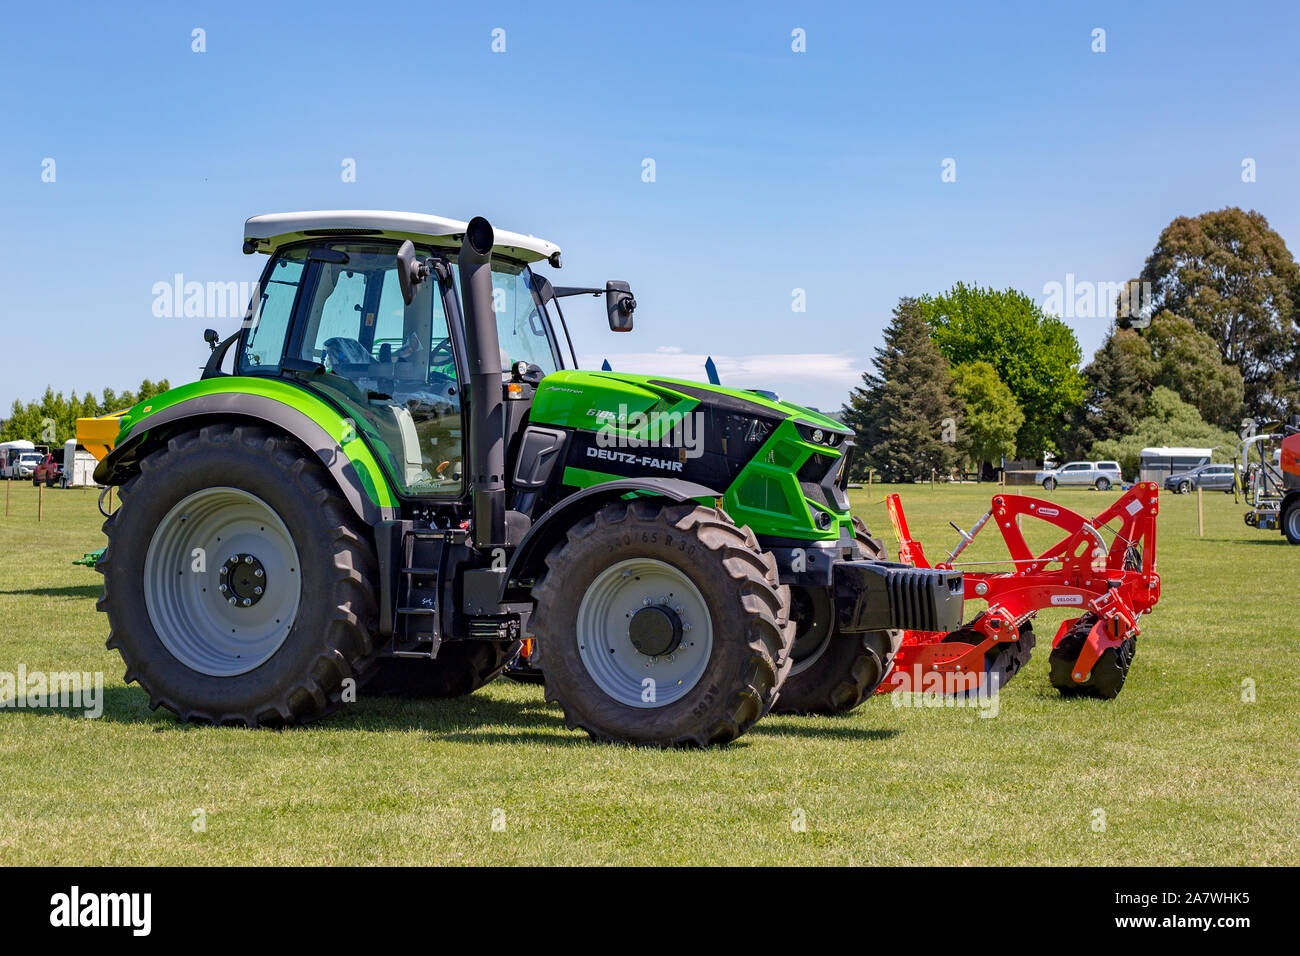 Amberley, Canterbury, New Zealand, November 2 2019: Brand new green Deutz-Fahr tractor on display at the A&P Showgrounds Stock Photo